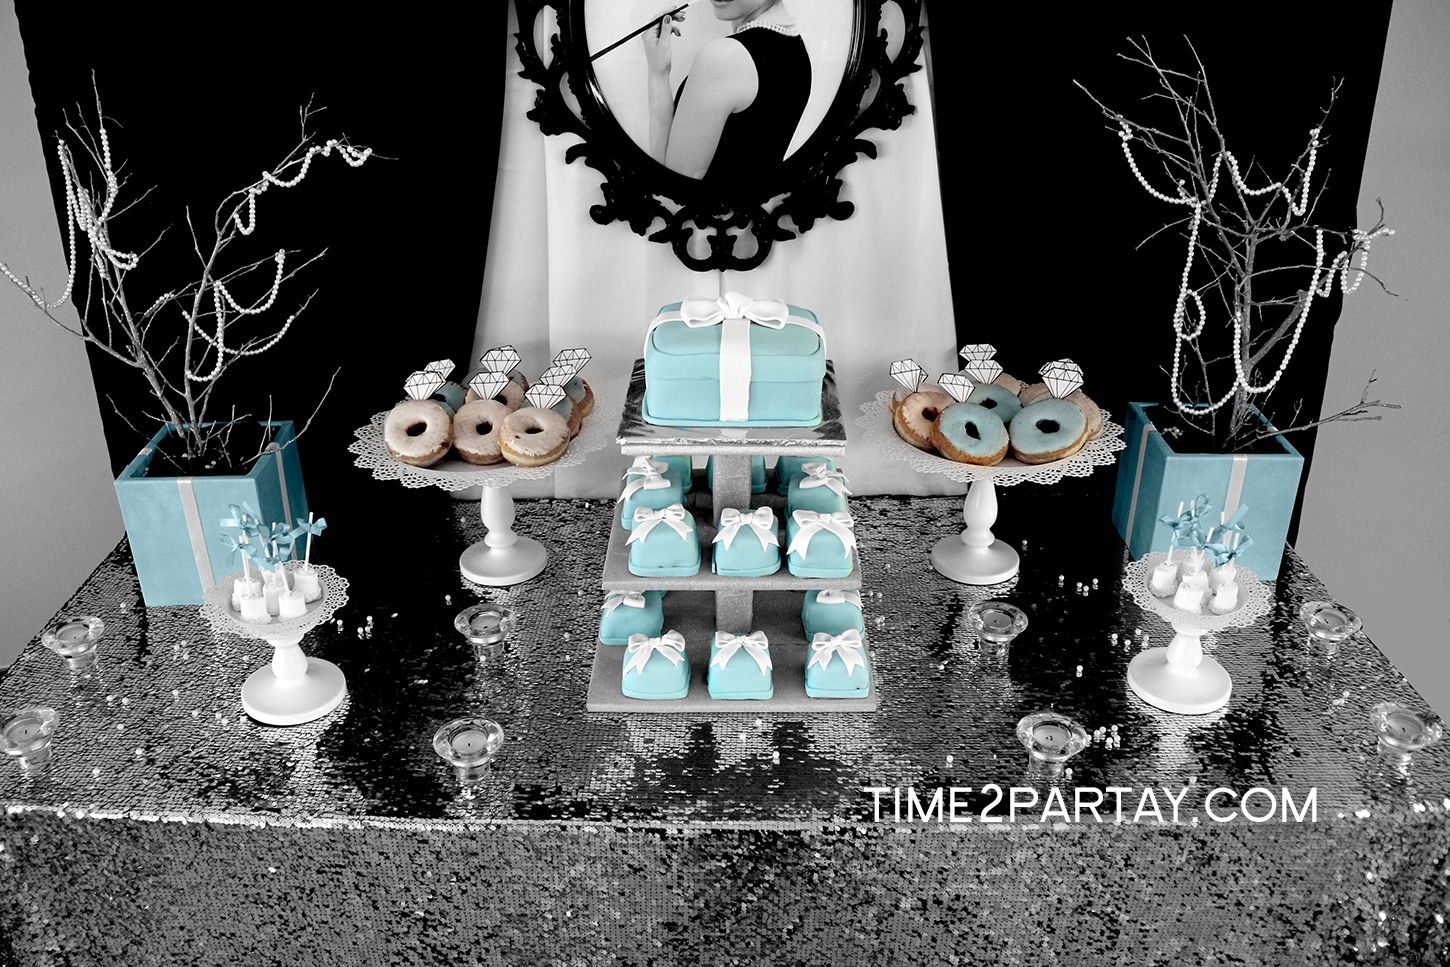 10 Best Black And White Bridal Shower Ideas time2partay blogspot lamiss tiffany co themed bridal shower 2022